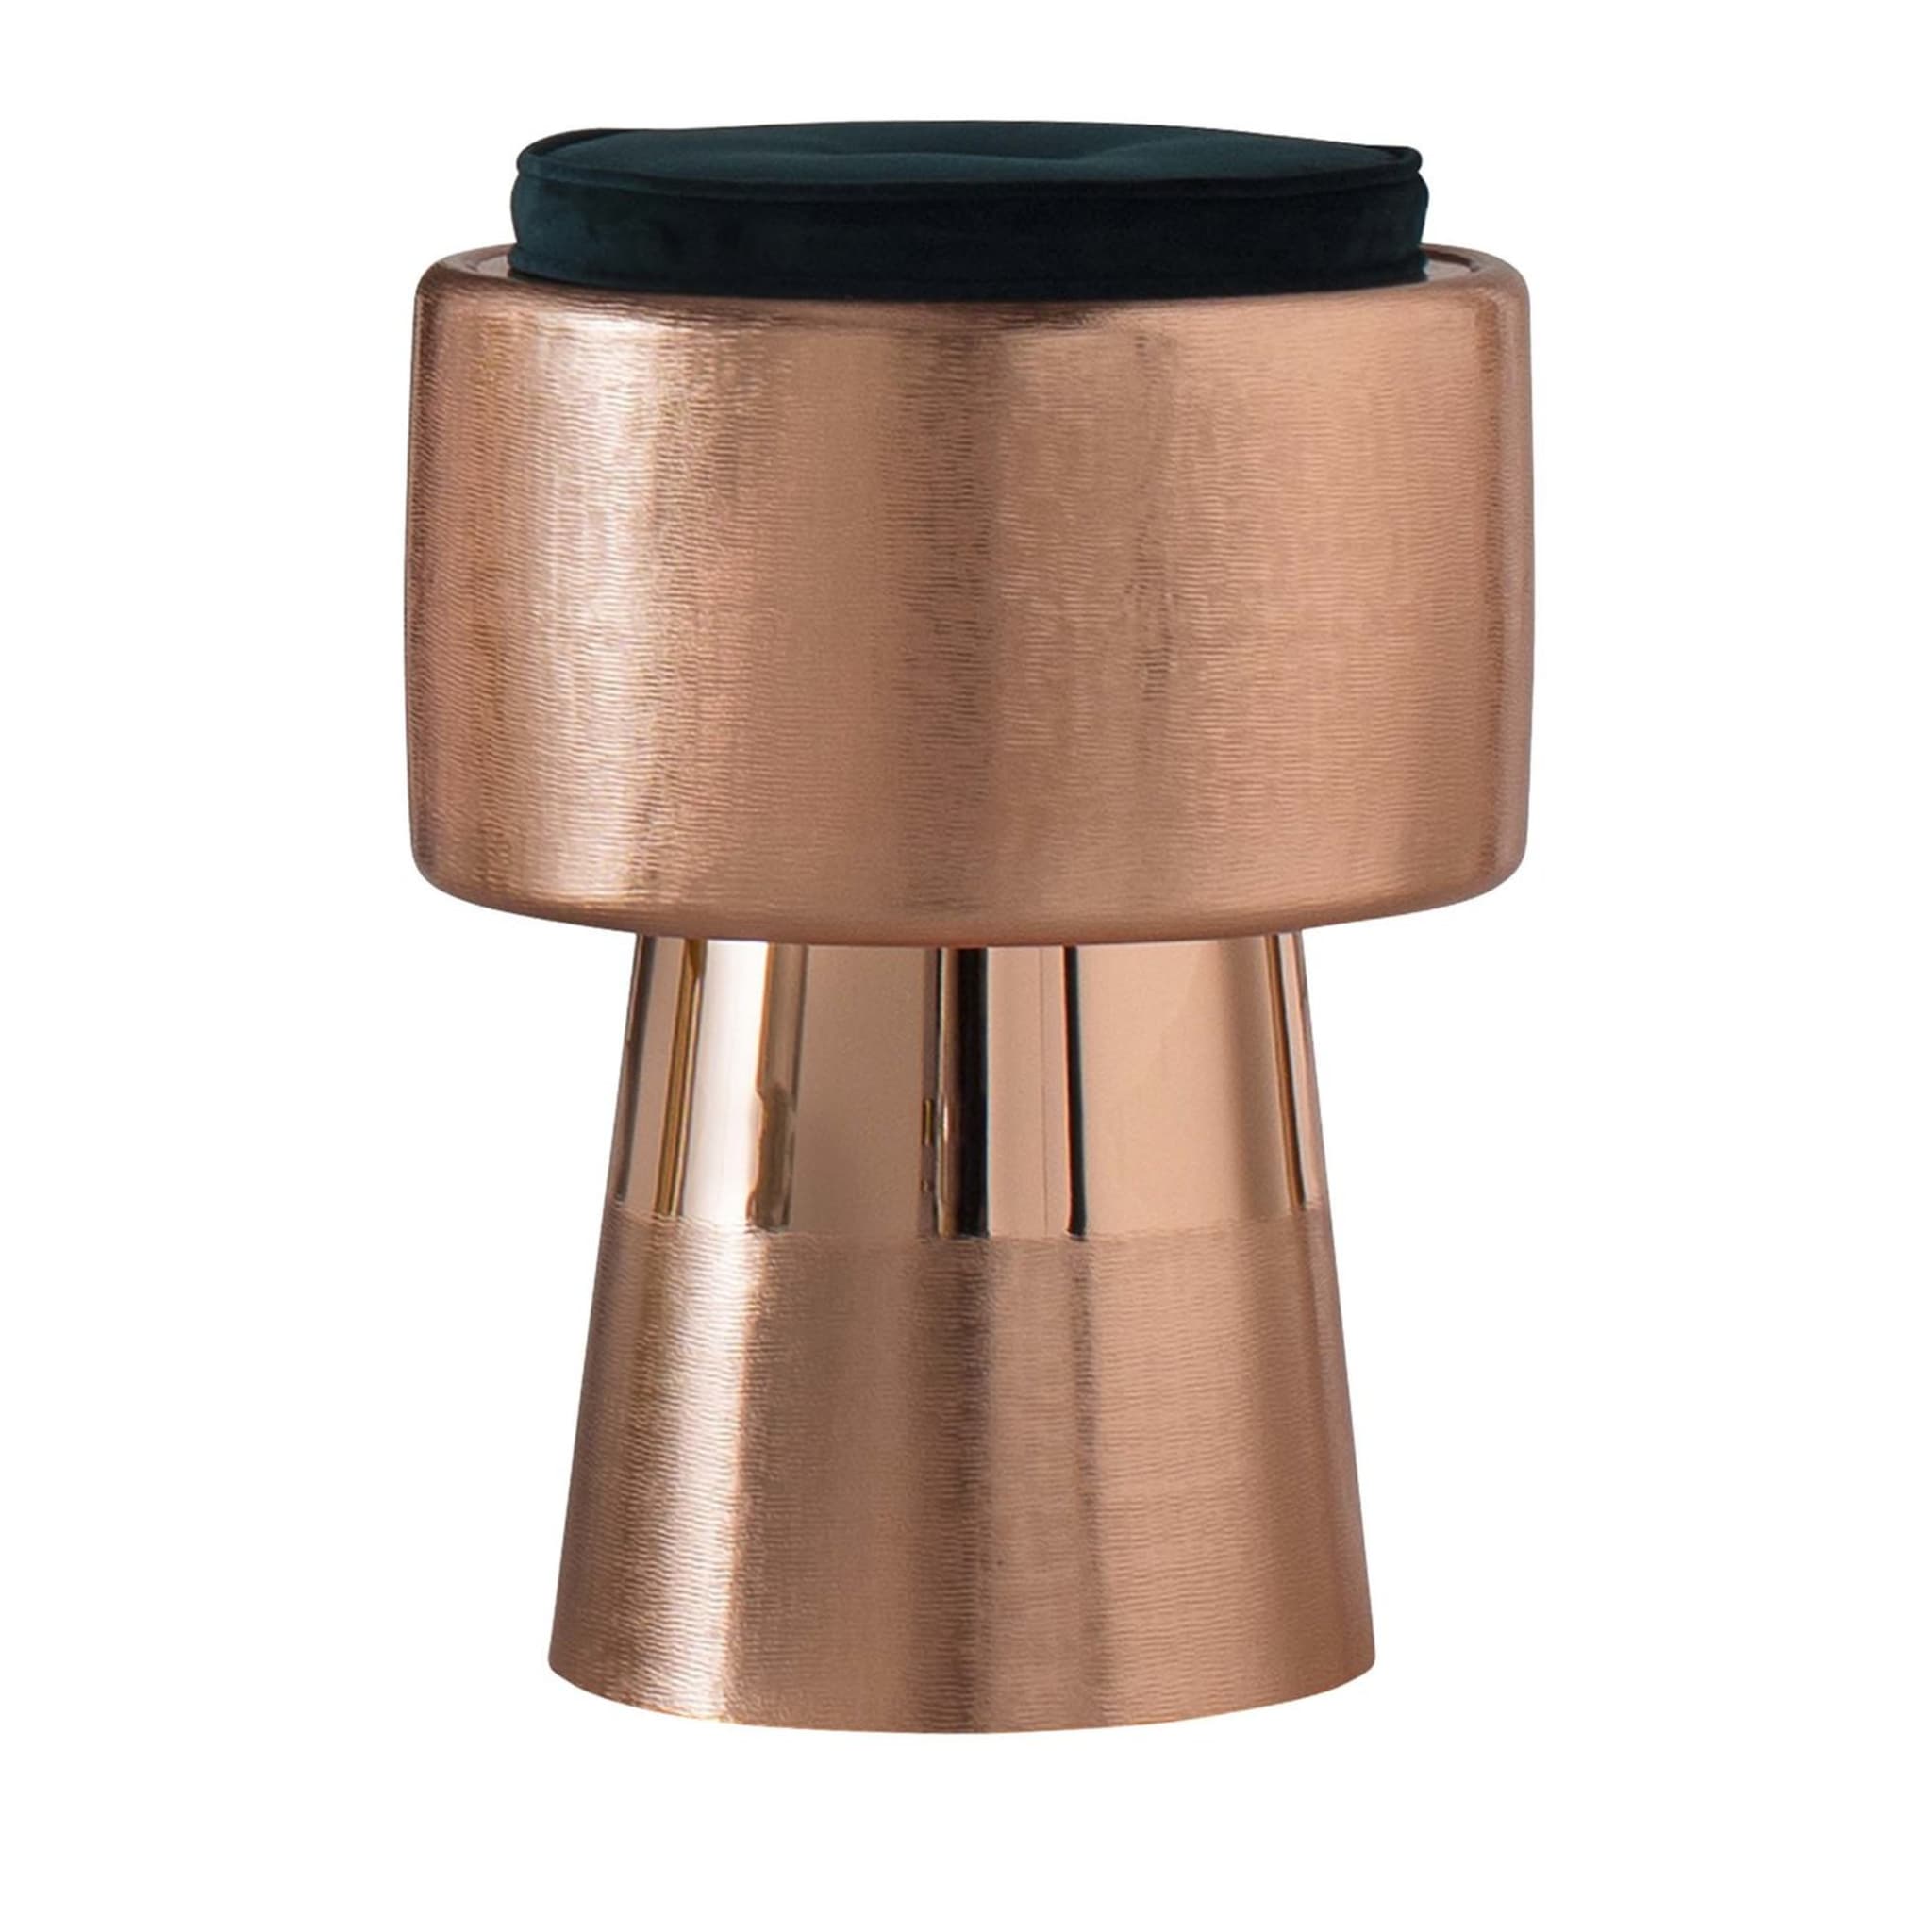 Tappo Bronze Stool by NOOII - Main view